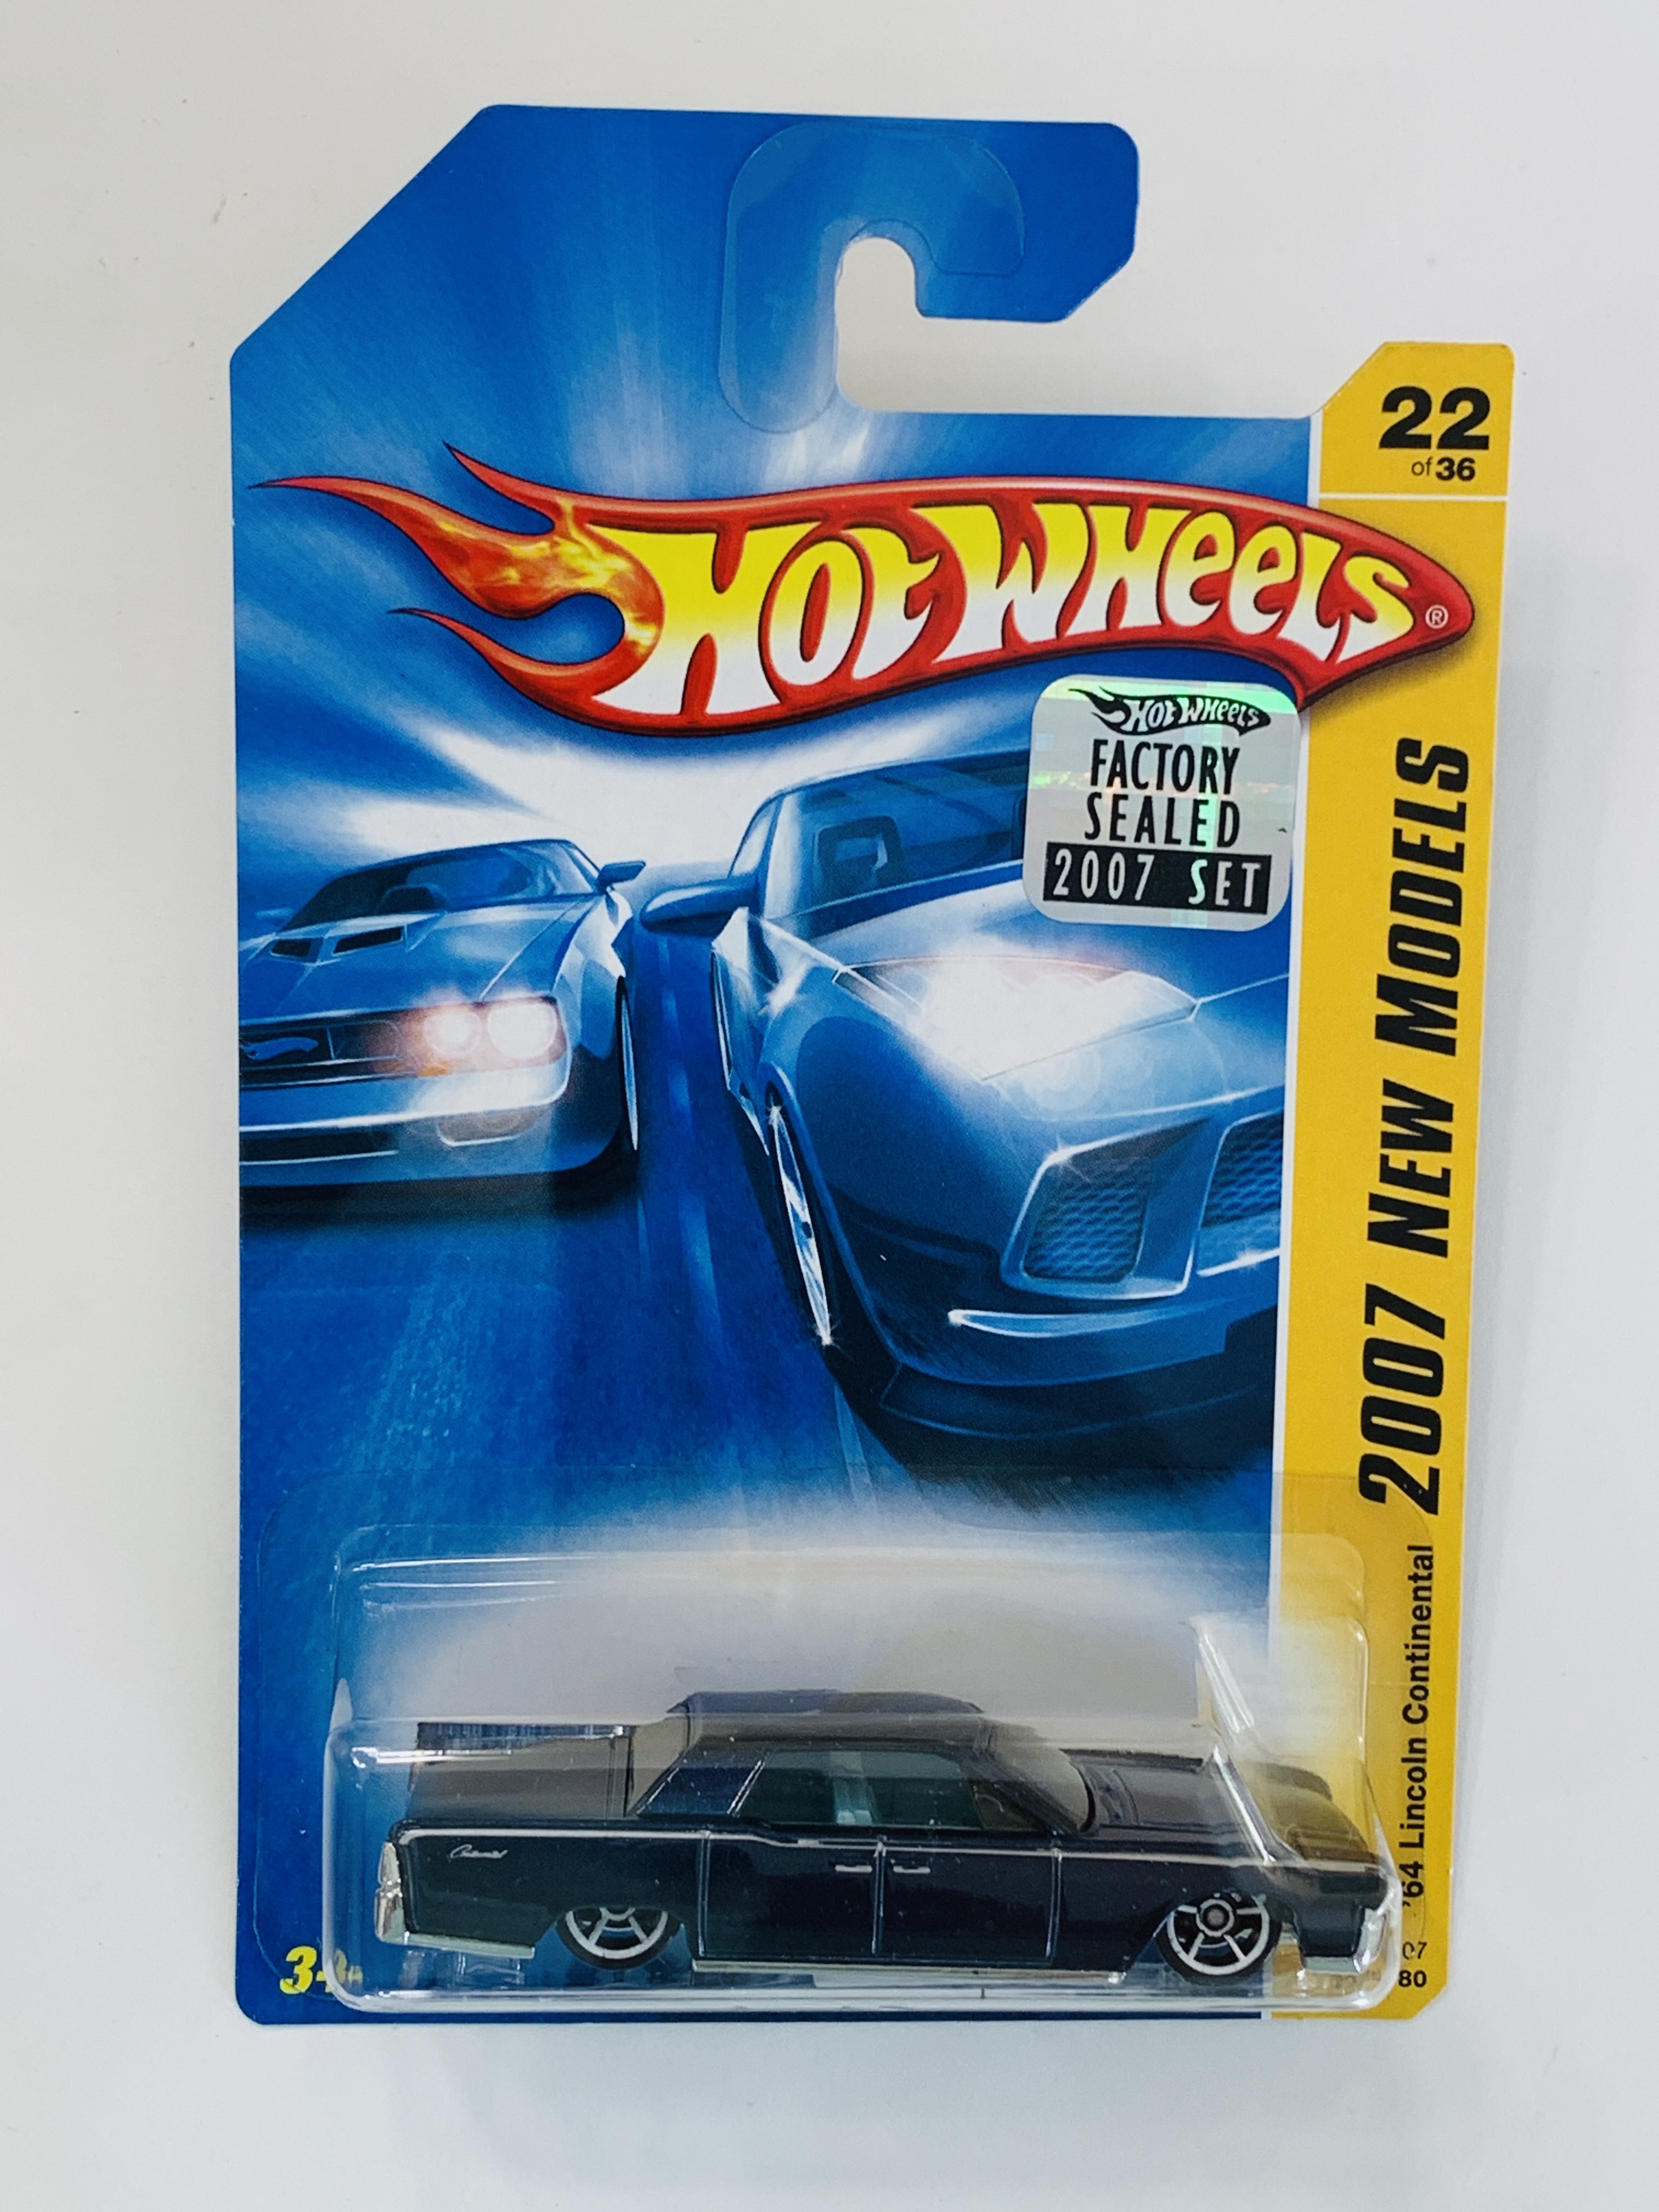 Hot Wheels 2007 Factory Set #022 '64 Lincoln Continental - Blue Interior